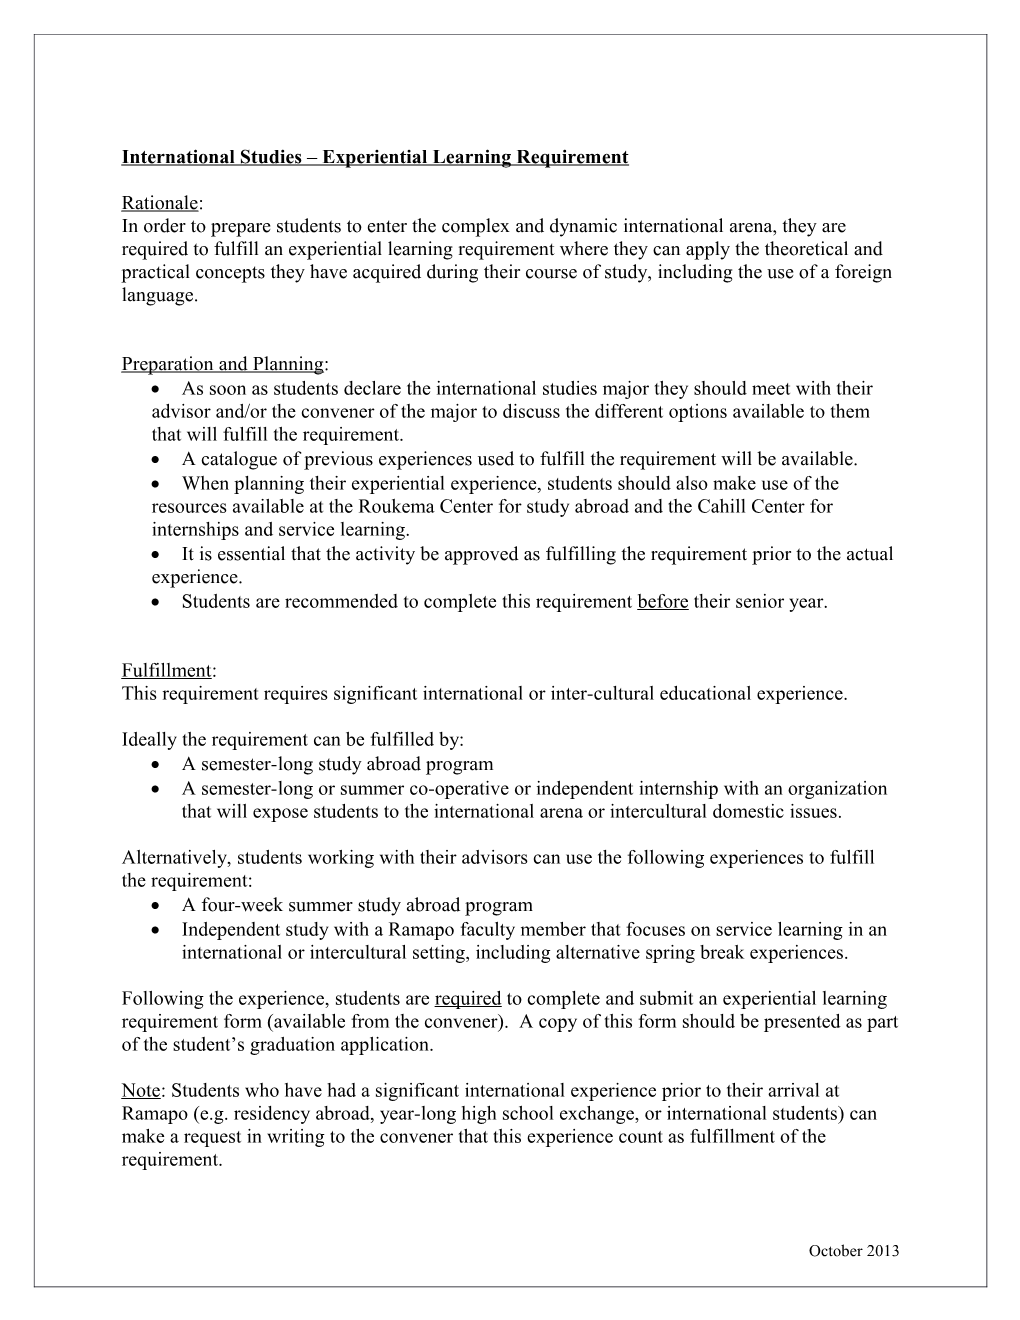 International Studies Experiential Learning Requirement